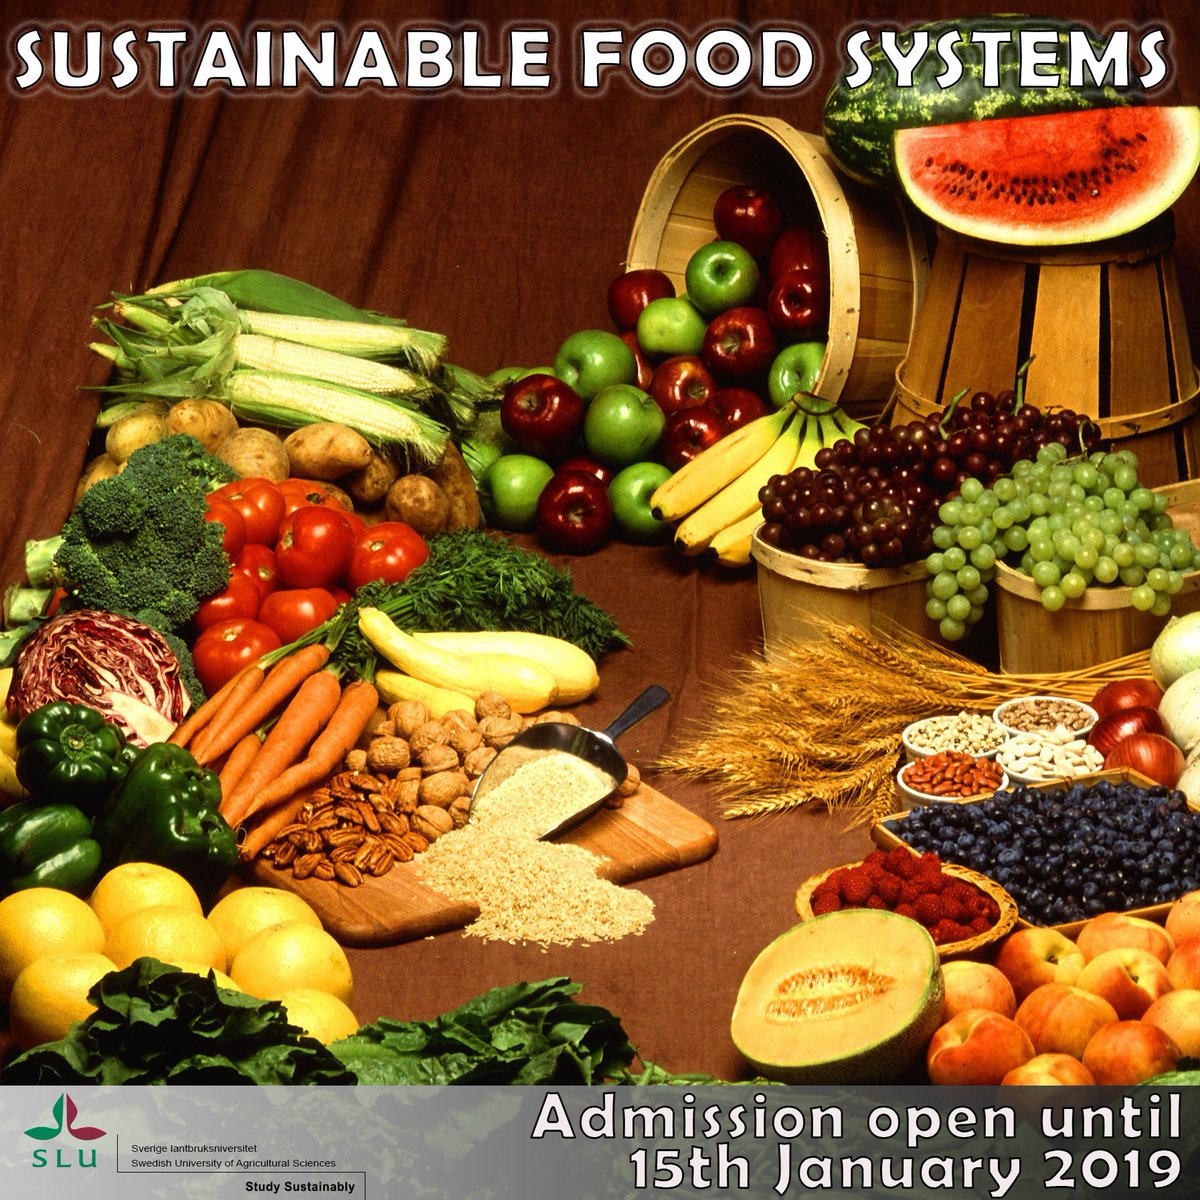 Do you want to work in the food industry or research in food system? Then the master studies in Sustainable Food Systems will give you the required skills and opportunities you are looking for! 
Details: slu.se/en/education/p…
@SLUFutureFood #SustainableFoodSystem #StudyinSweden